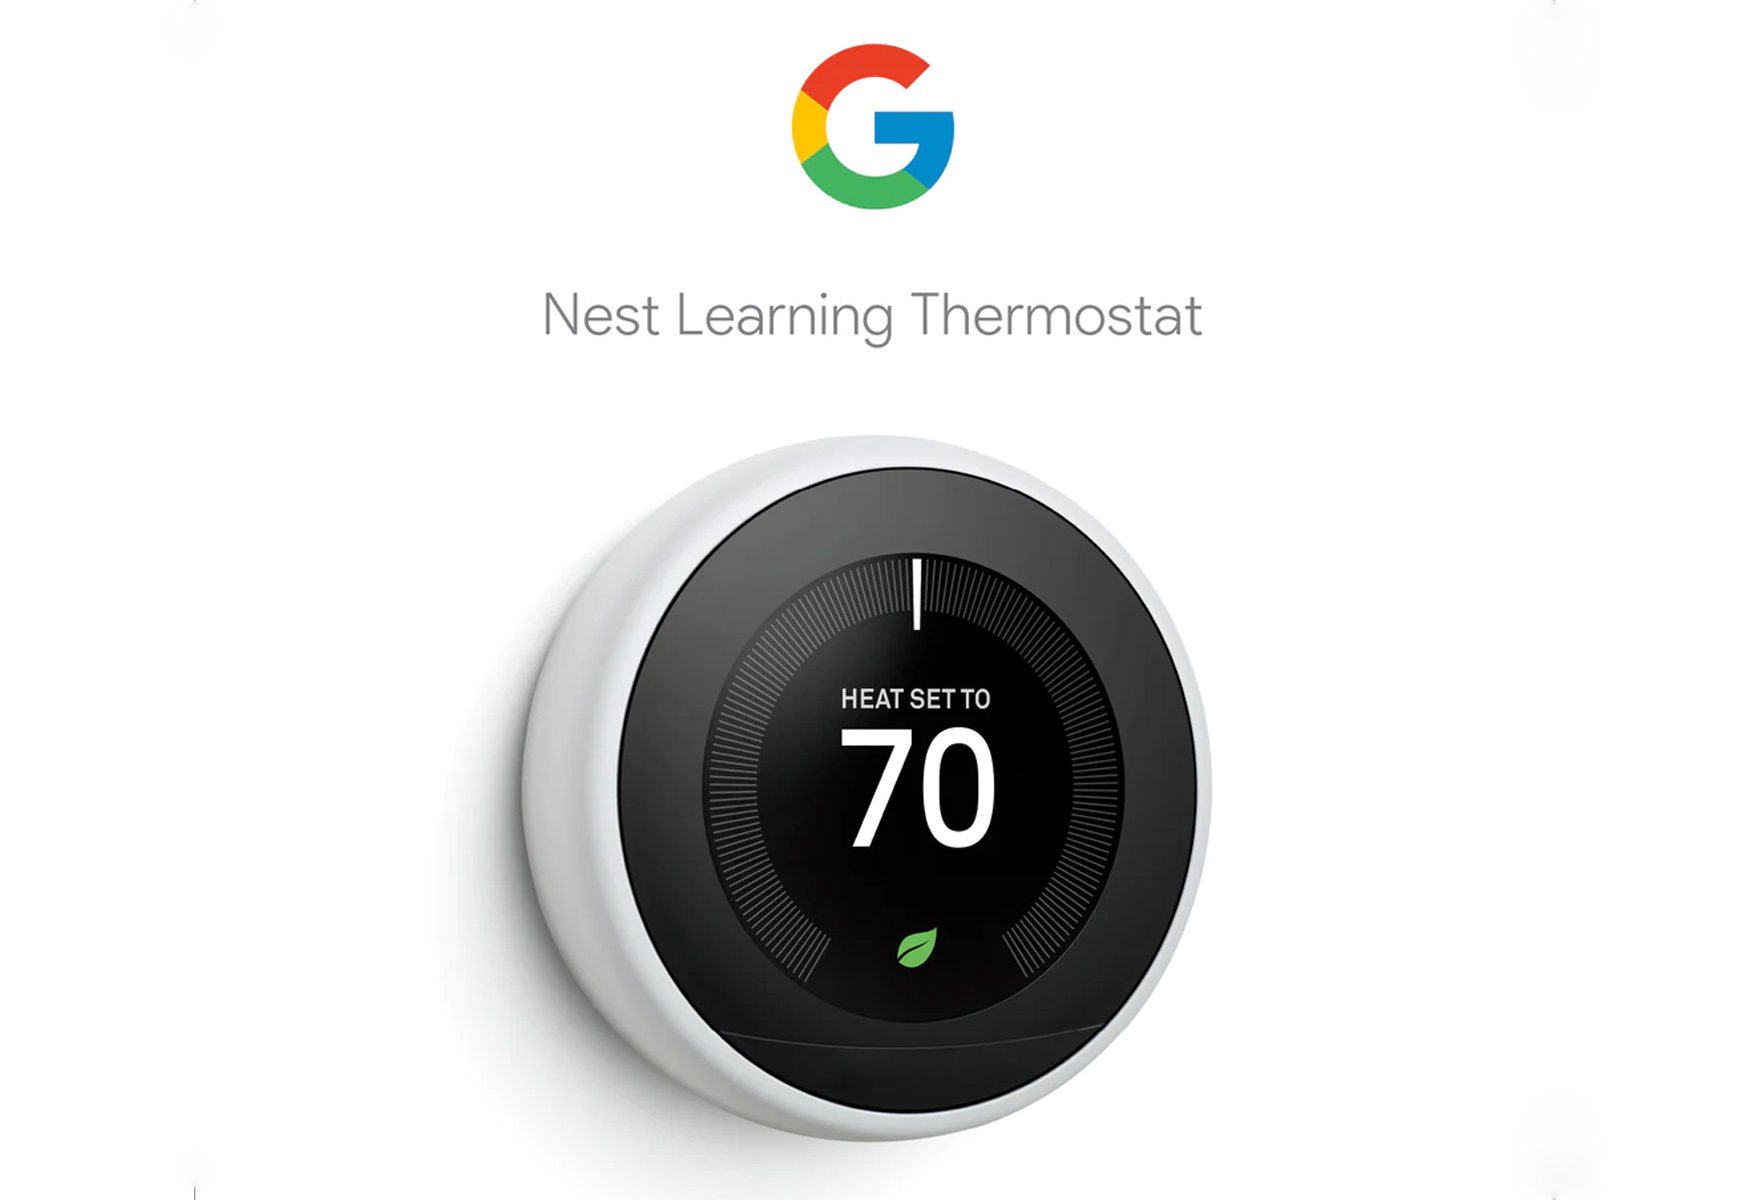 Renew Home Emerges As Google Nest Renew And OhmConnect Merge With $100M SIP Investment